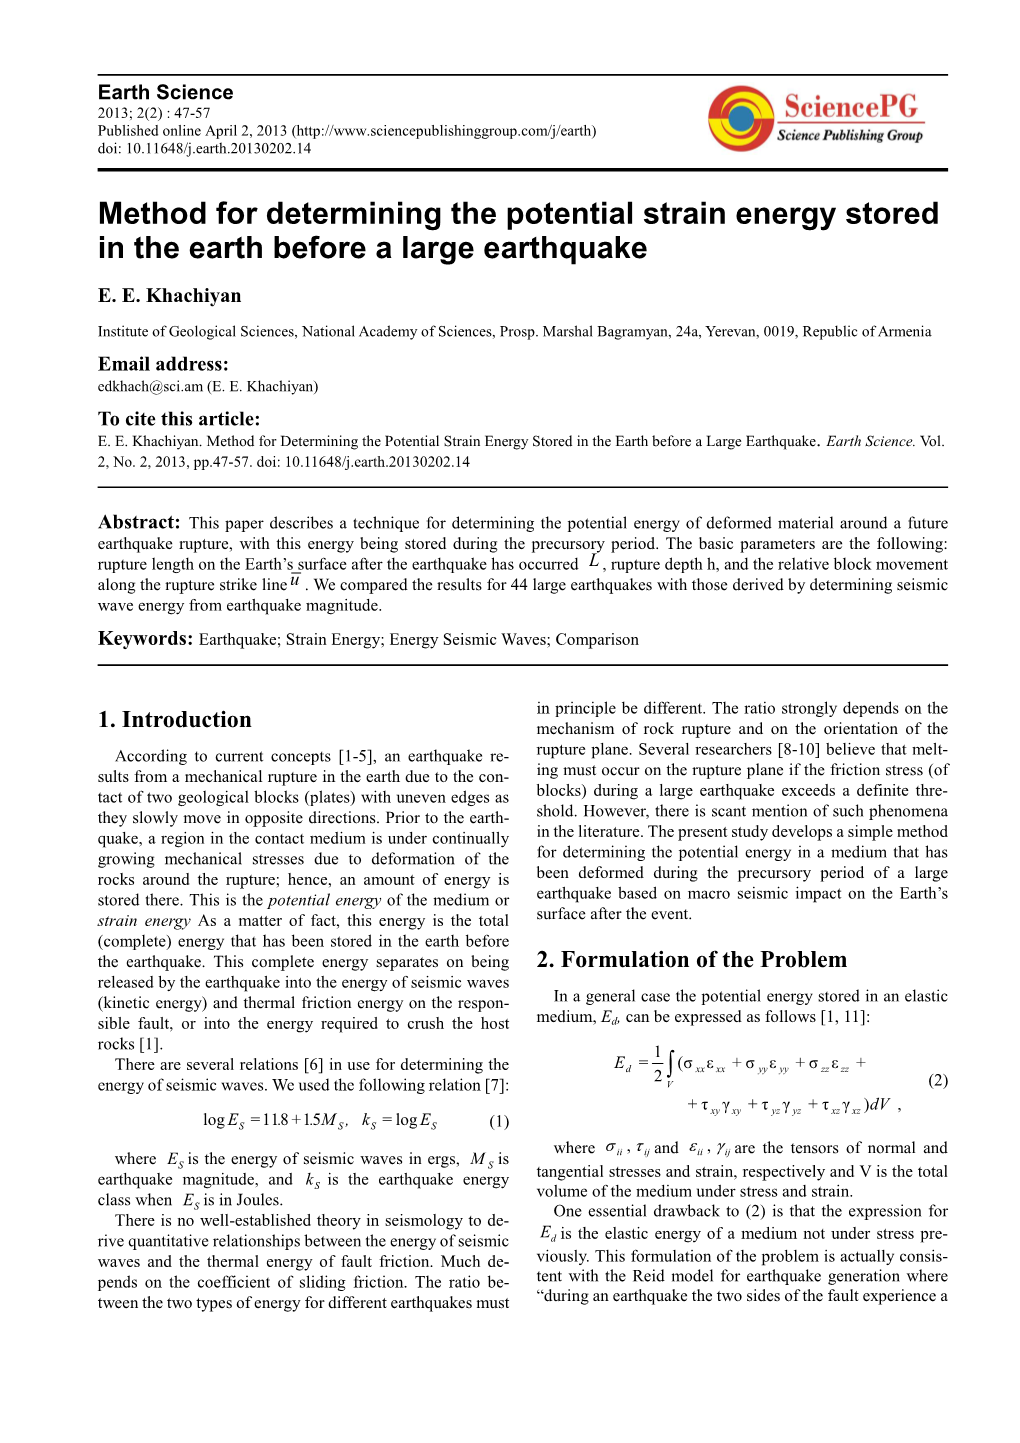 Method for Determining the Potential Strain Energy Stored in the Earth Before a Large Earthquake